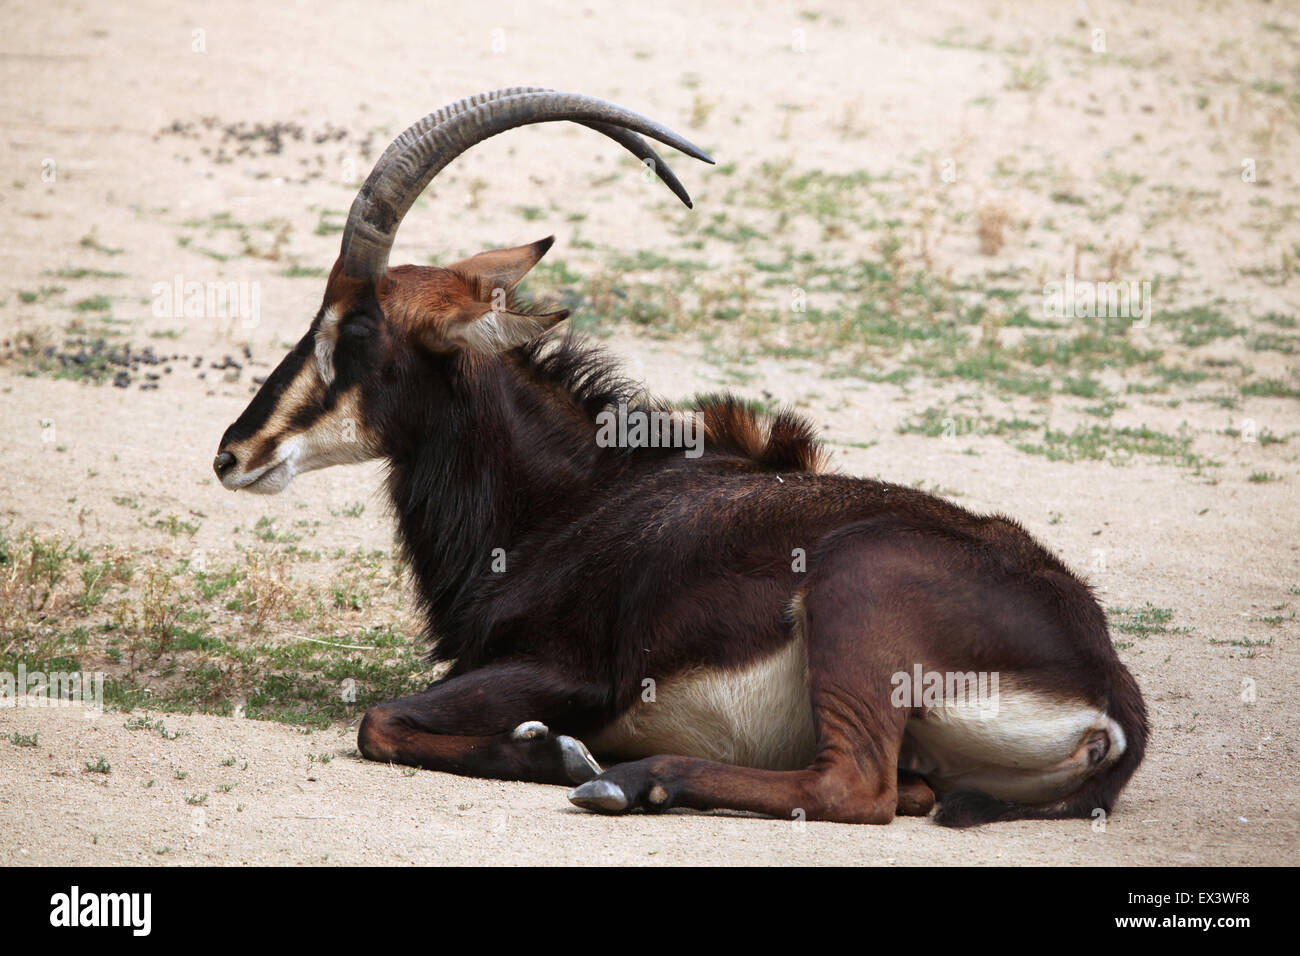 Sable antelope (Hippotragus niger), also known as the black antelope at Frankfurt Zoo in Frankfurt am Main, Hesse, Germany. Stock Photo